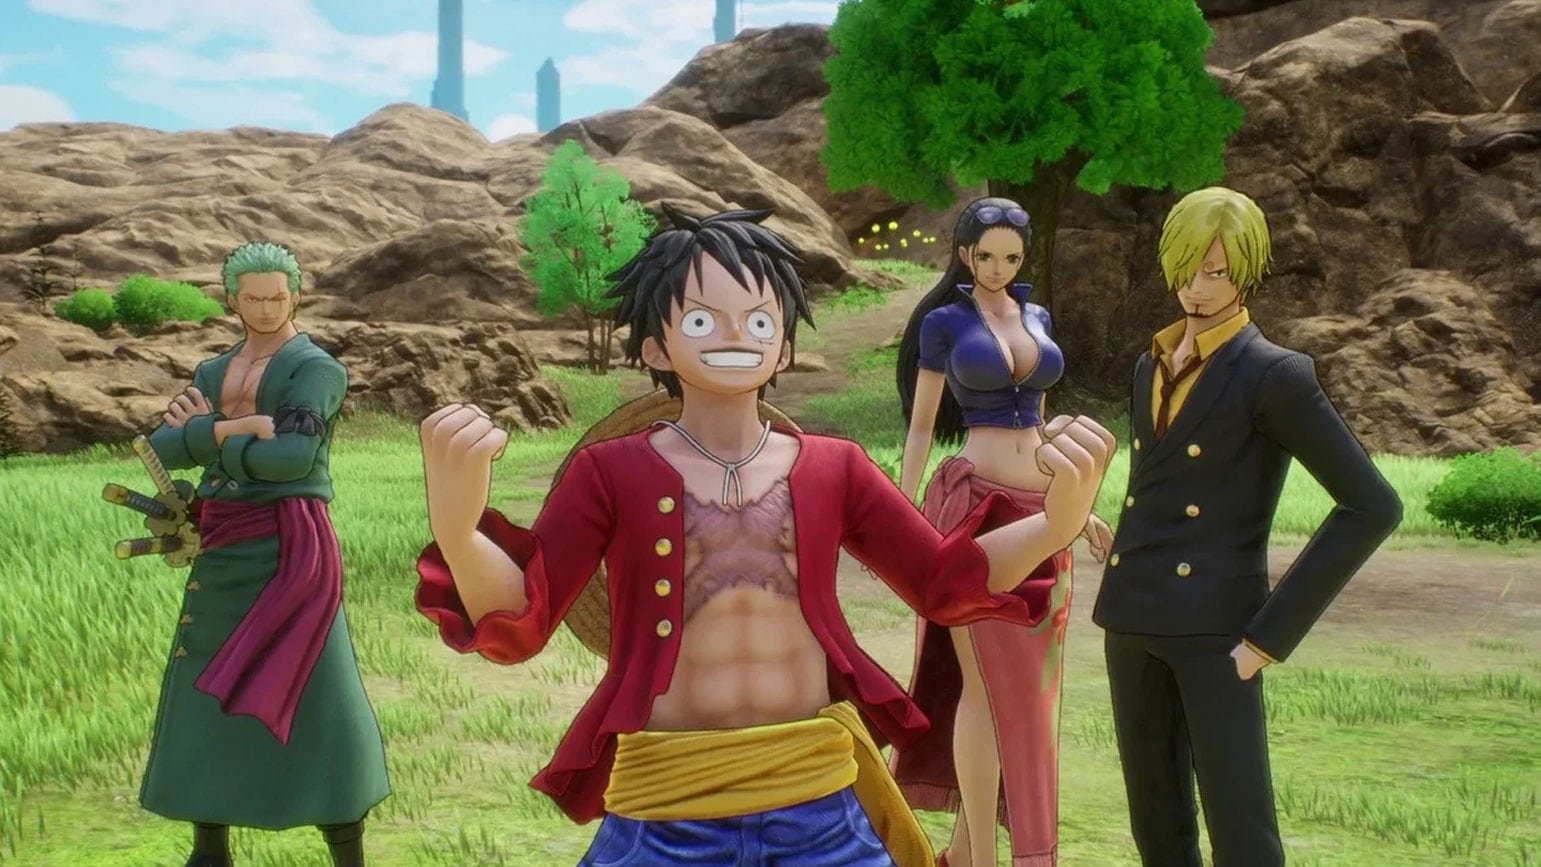 One Piece Anime Review: 7 Things That Make It a Legendary Series! (2023) -  Anime Ukiyo